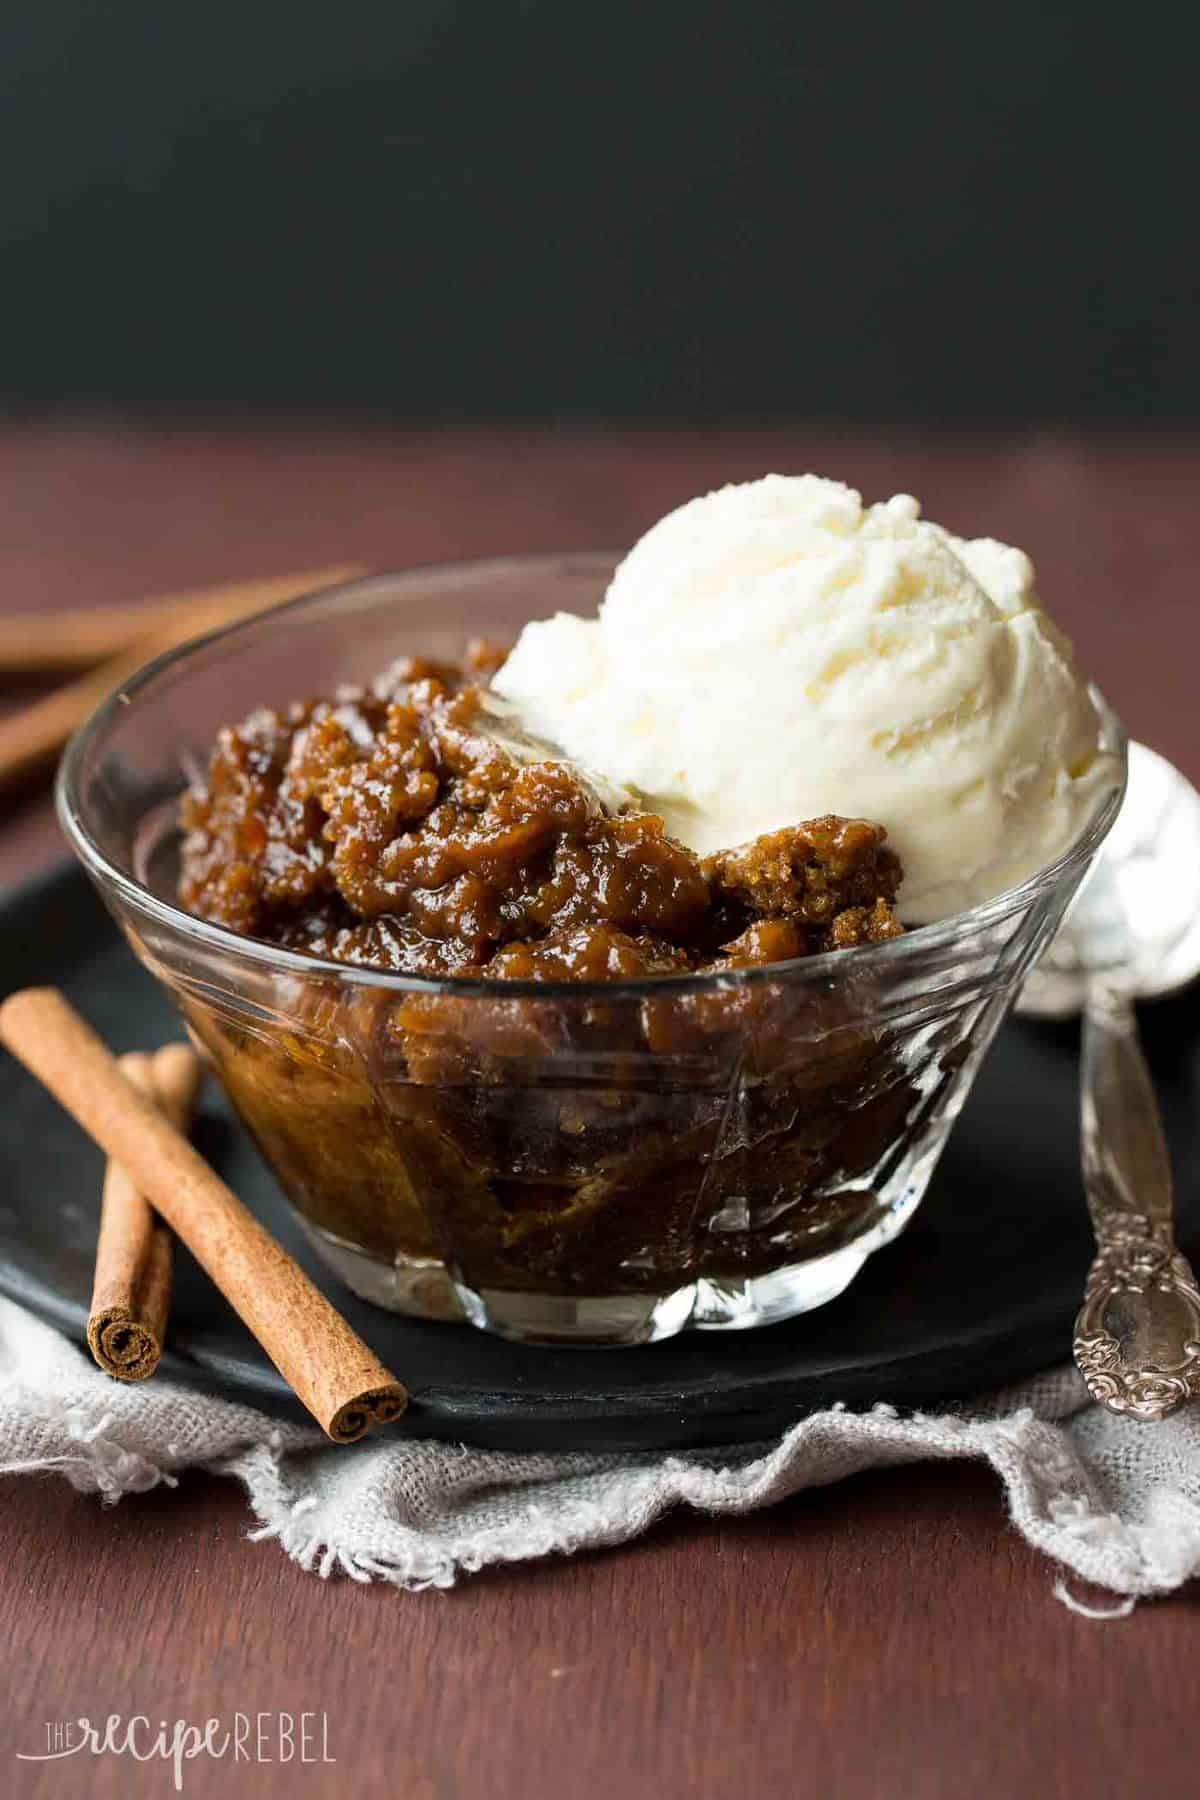 clear glass bowl of gingerbread pudding cake with scoop of vanilla ice cream on black plate